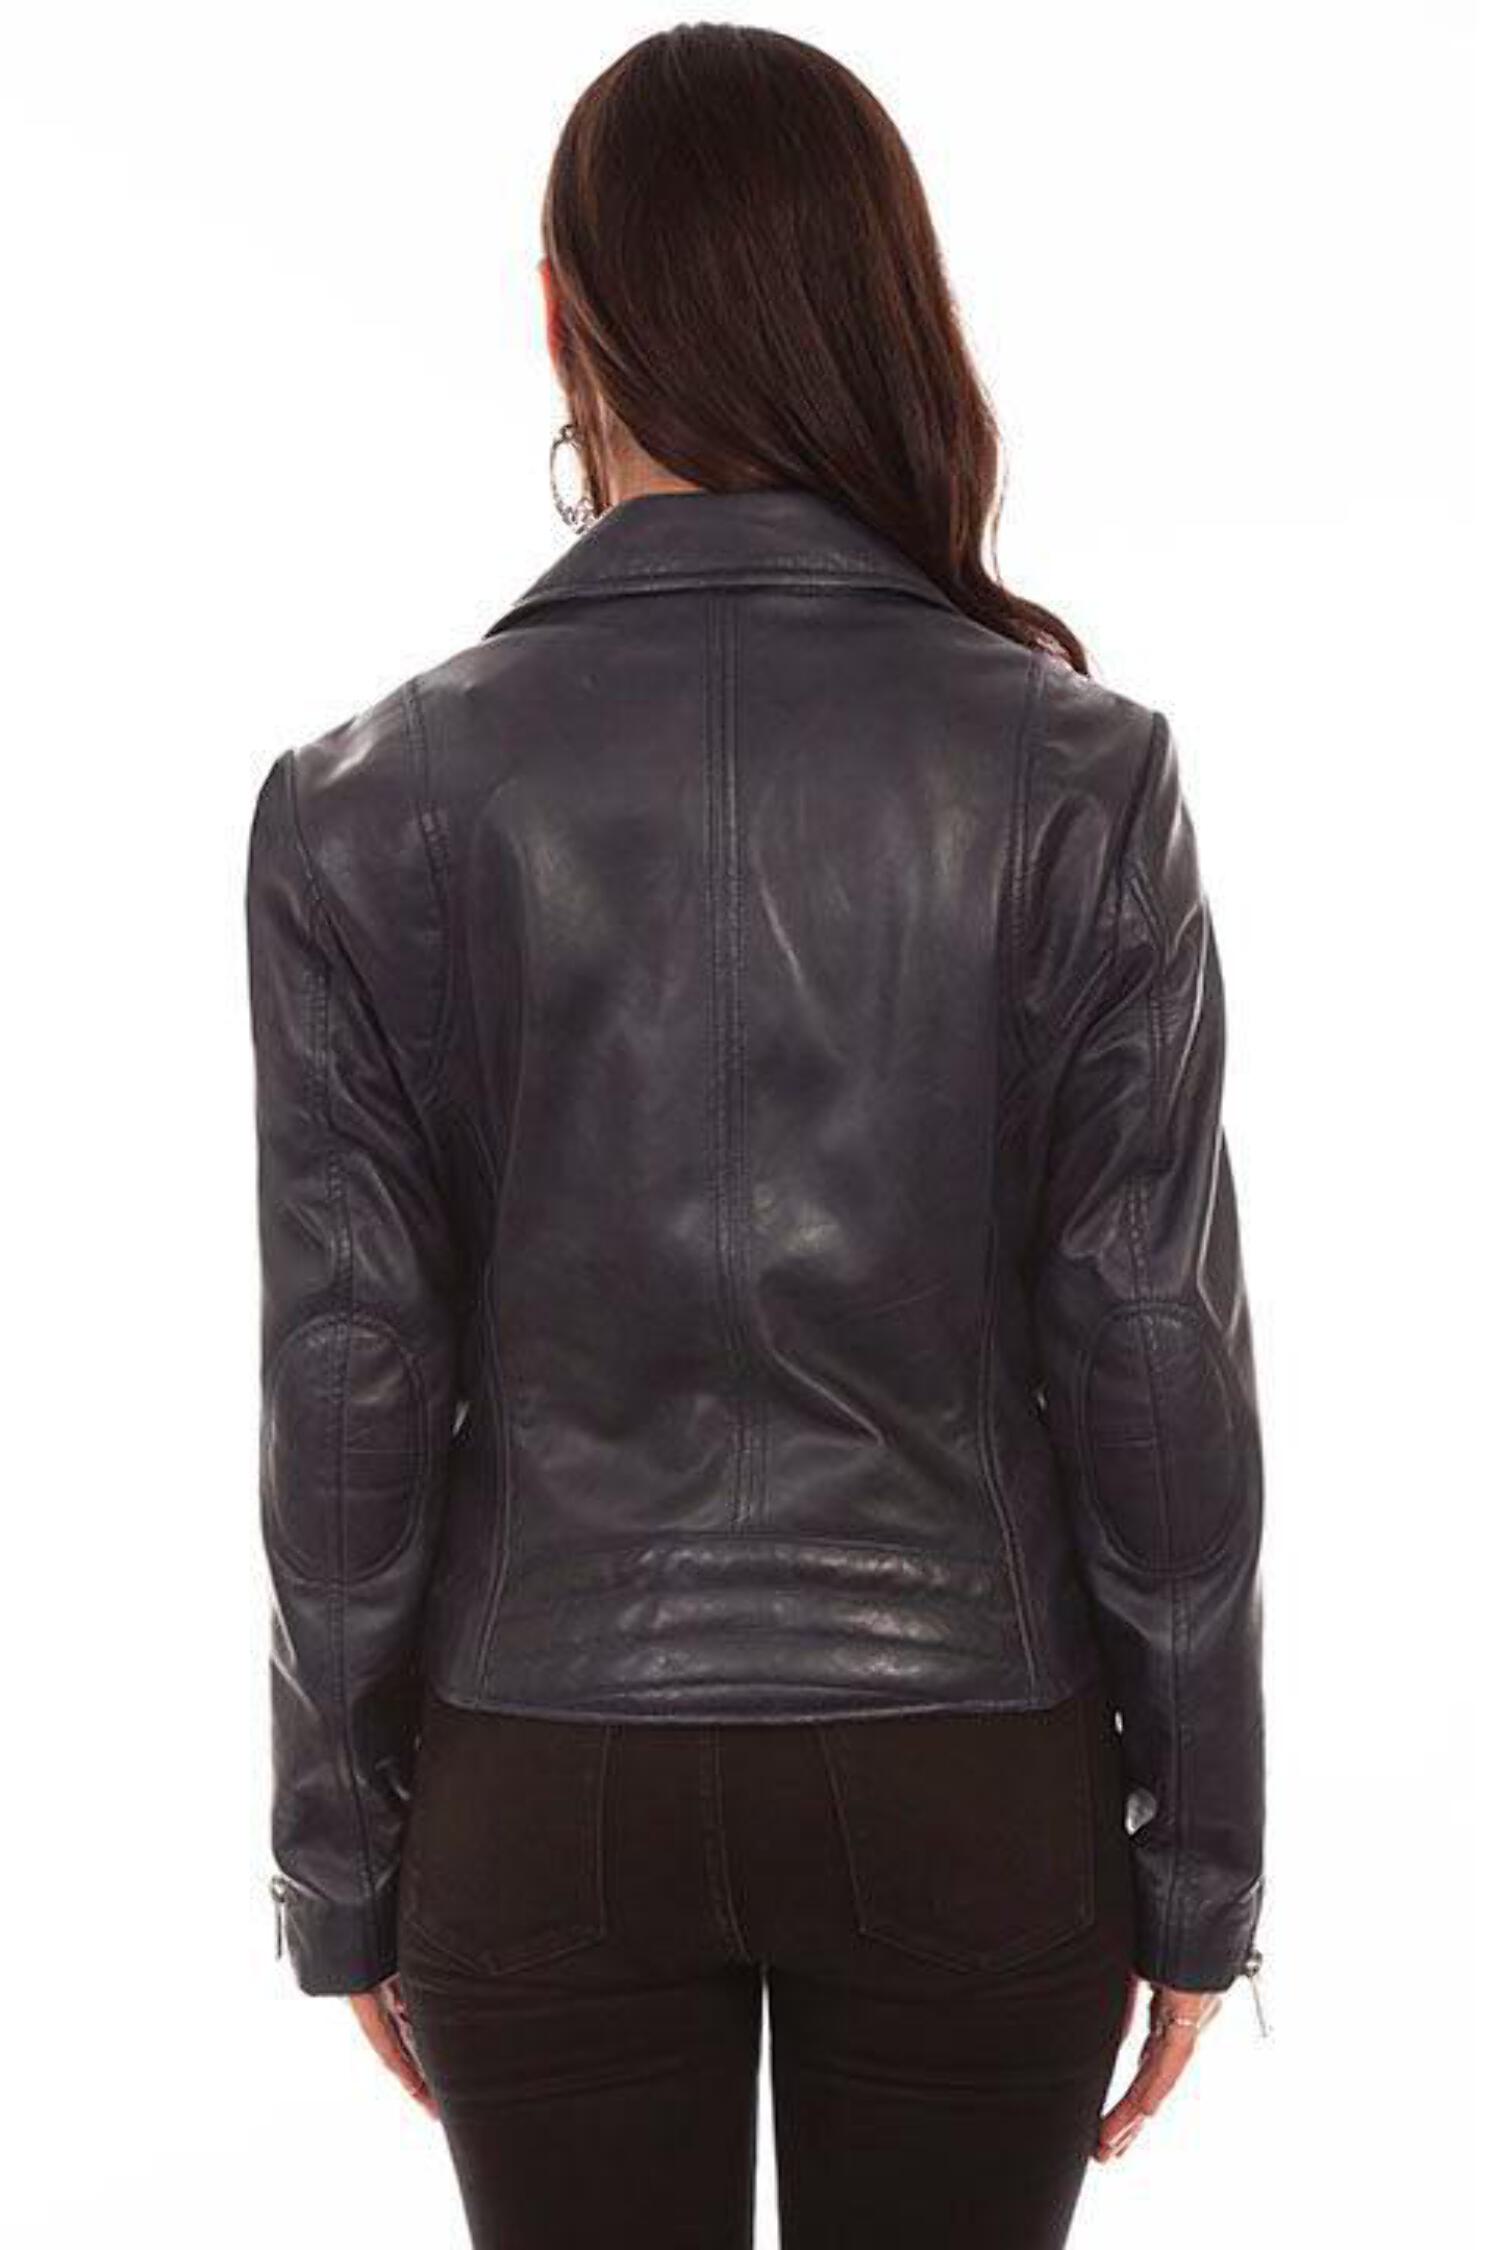 Scully L1048-310-XL Ladies Soft Touch Leather Motorcycle Jacket&#44; Navy - Extra Large - image 2 of 2